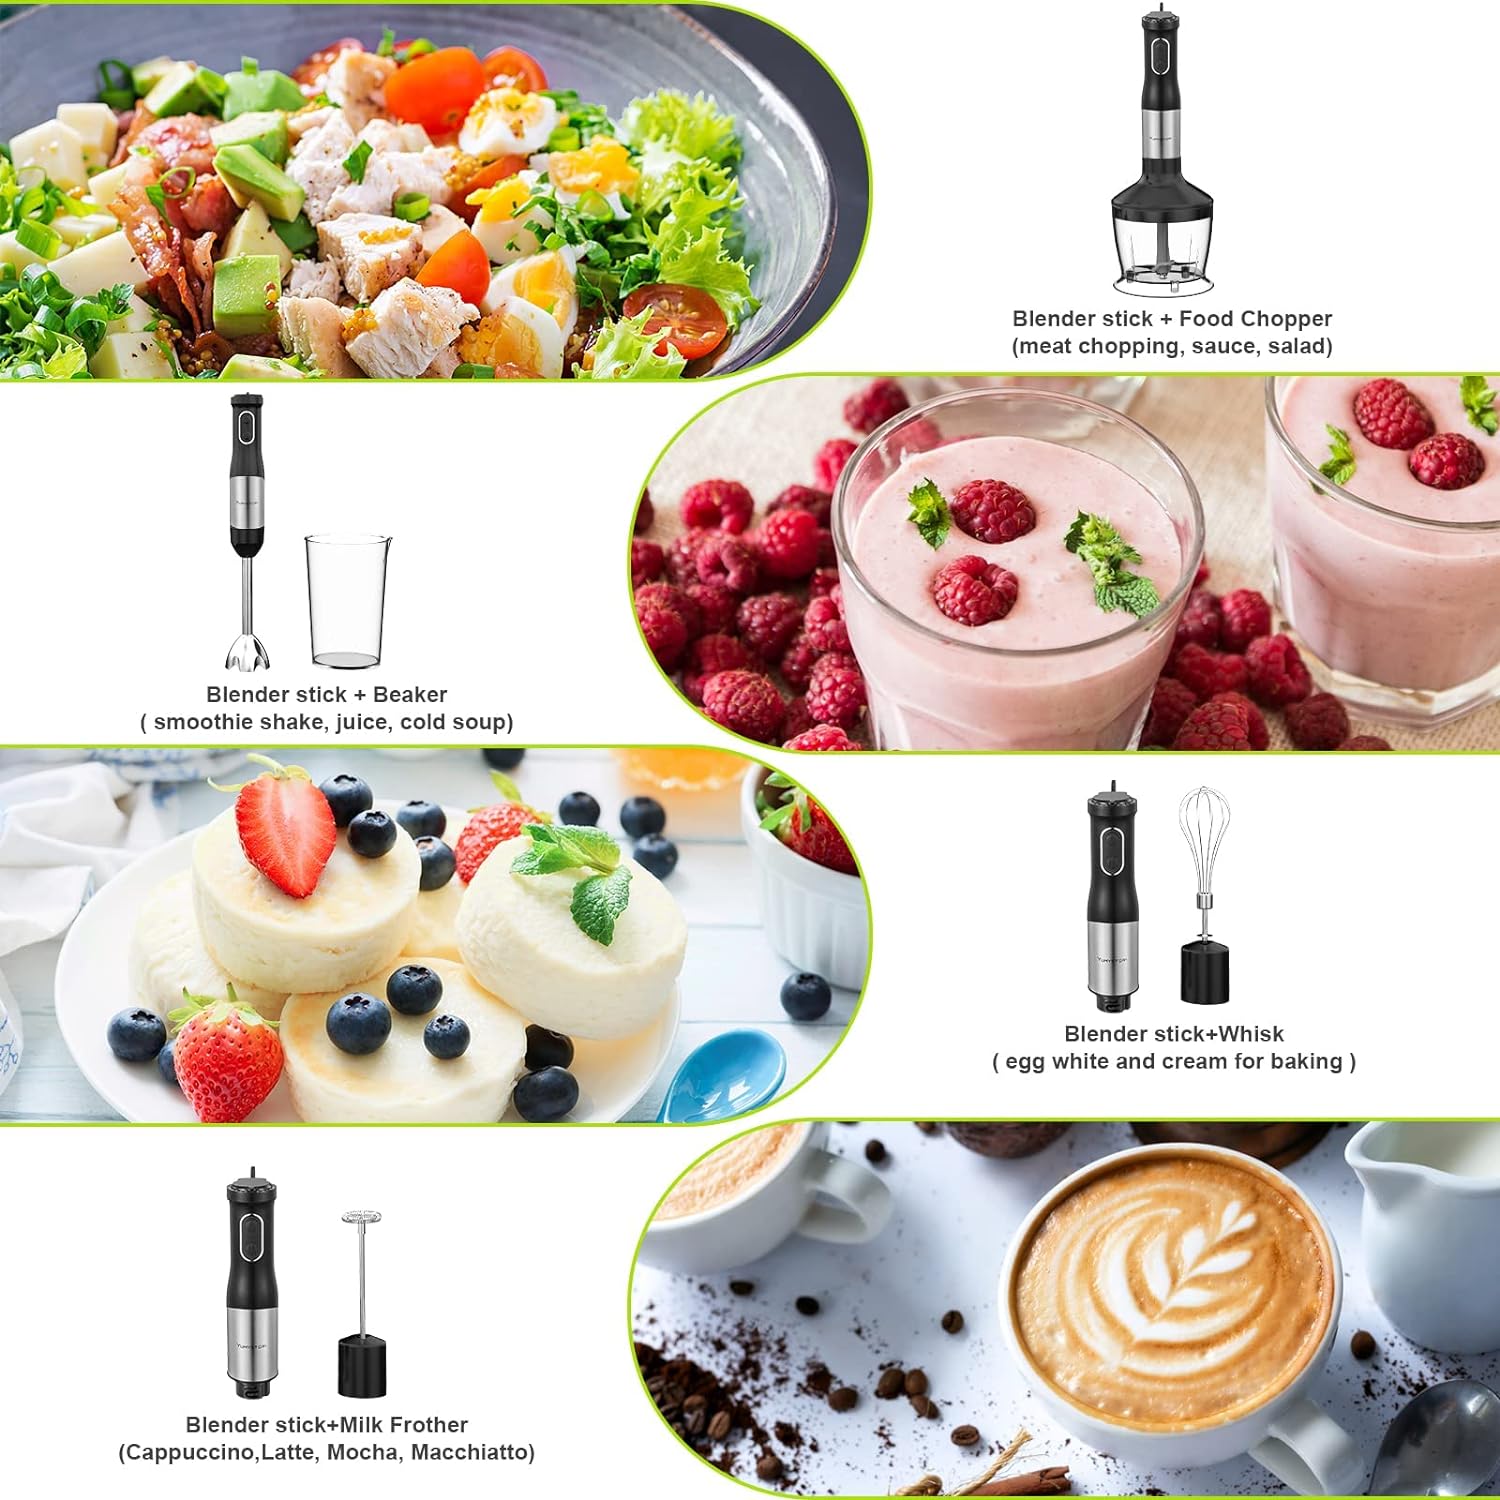 Yumystori Stainless Steel Hand blender Set,7 in 1 Stick Blender 800W,20 Speed Immersion Blender with Ice Crush,Beaker,Chopper,Whisk,Frother,Blenders for Kitchen,Baby Food,Soup,Smoothie,Food Processor - Amazing Gadgets Outlet